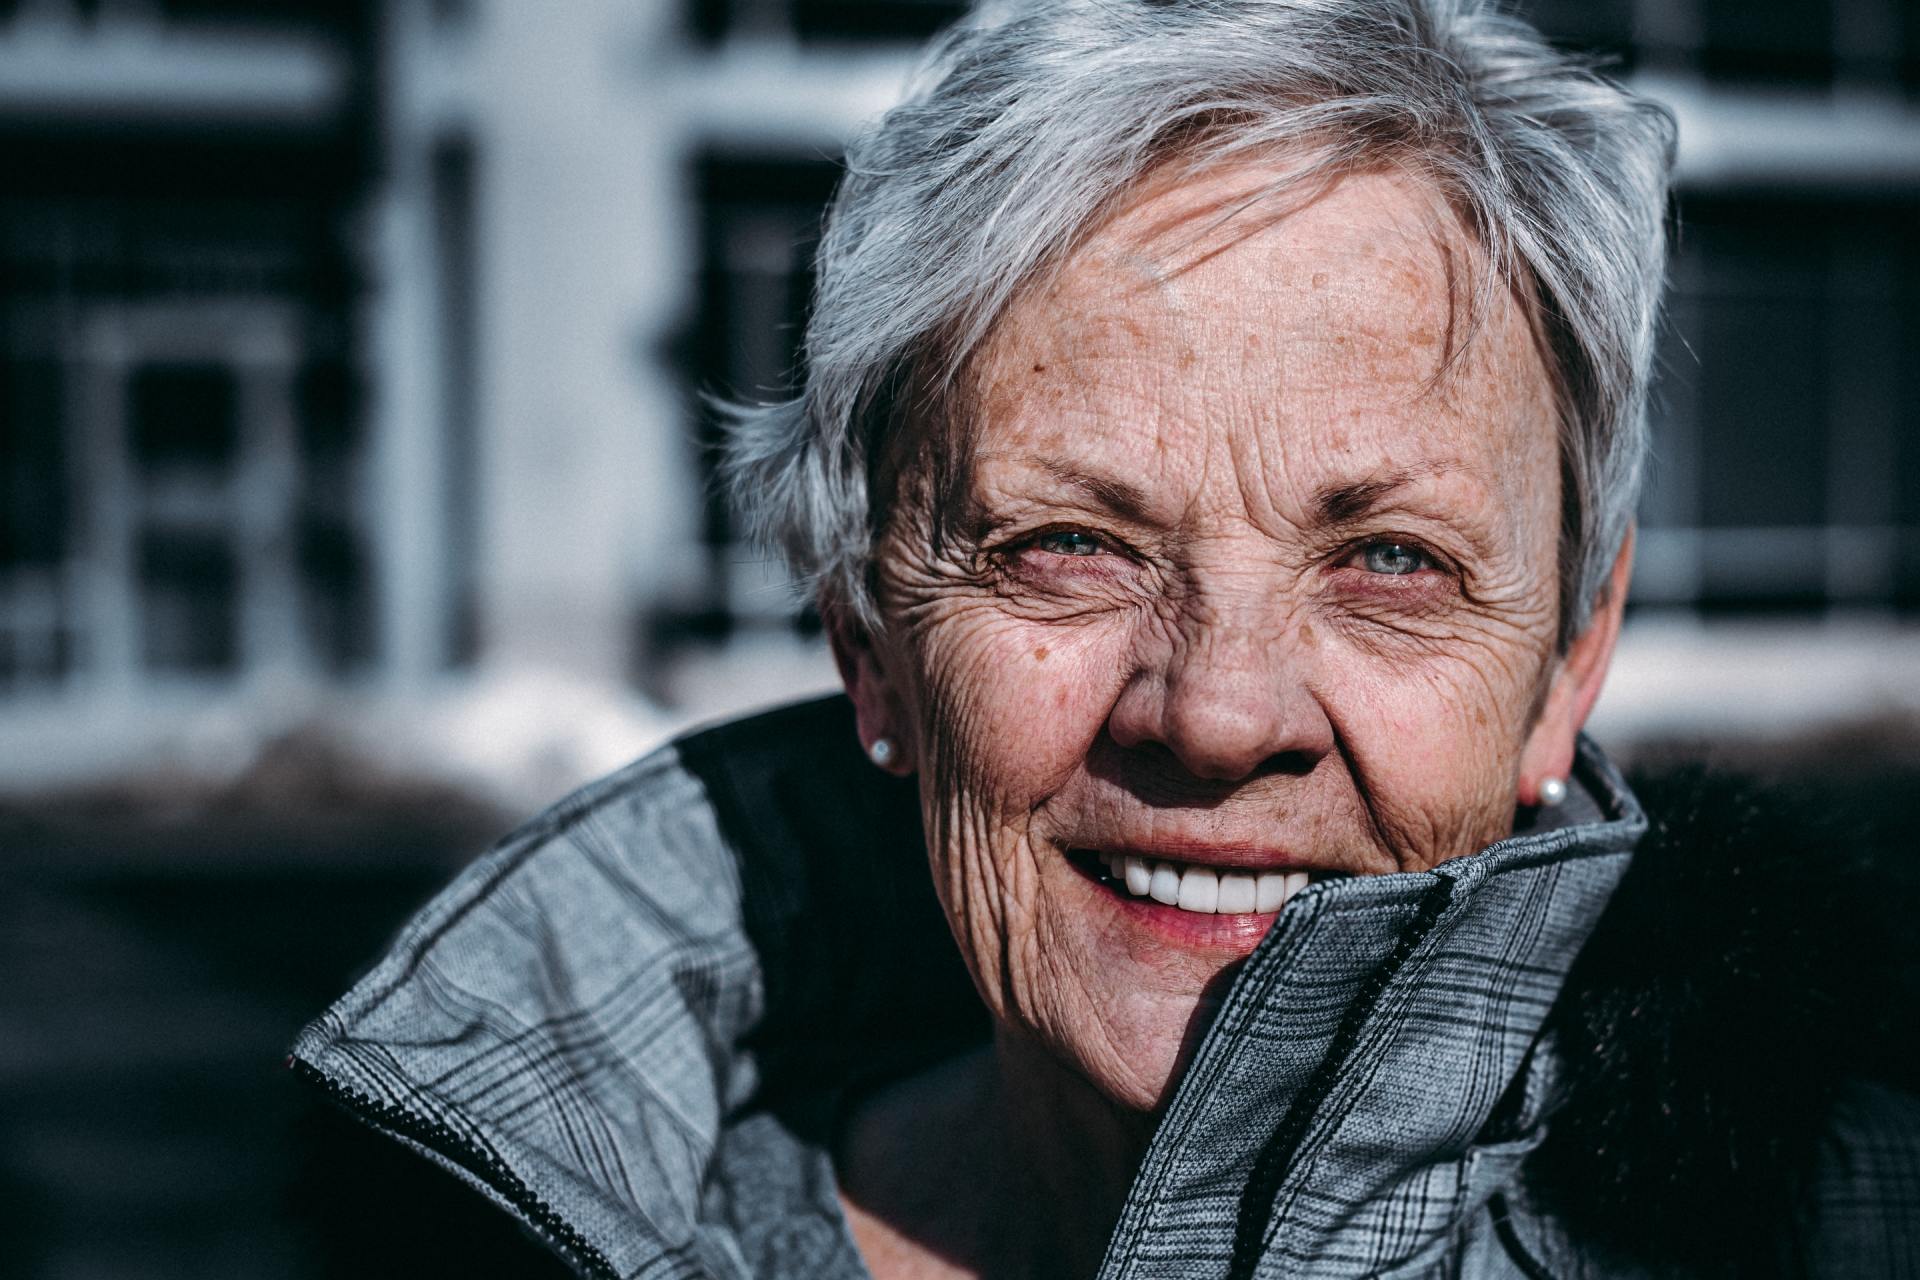 An elderly woman with gray hair is smiling for the camera.